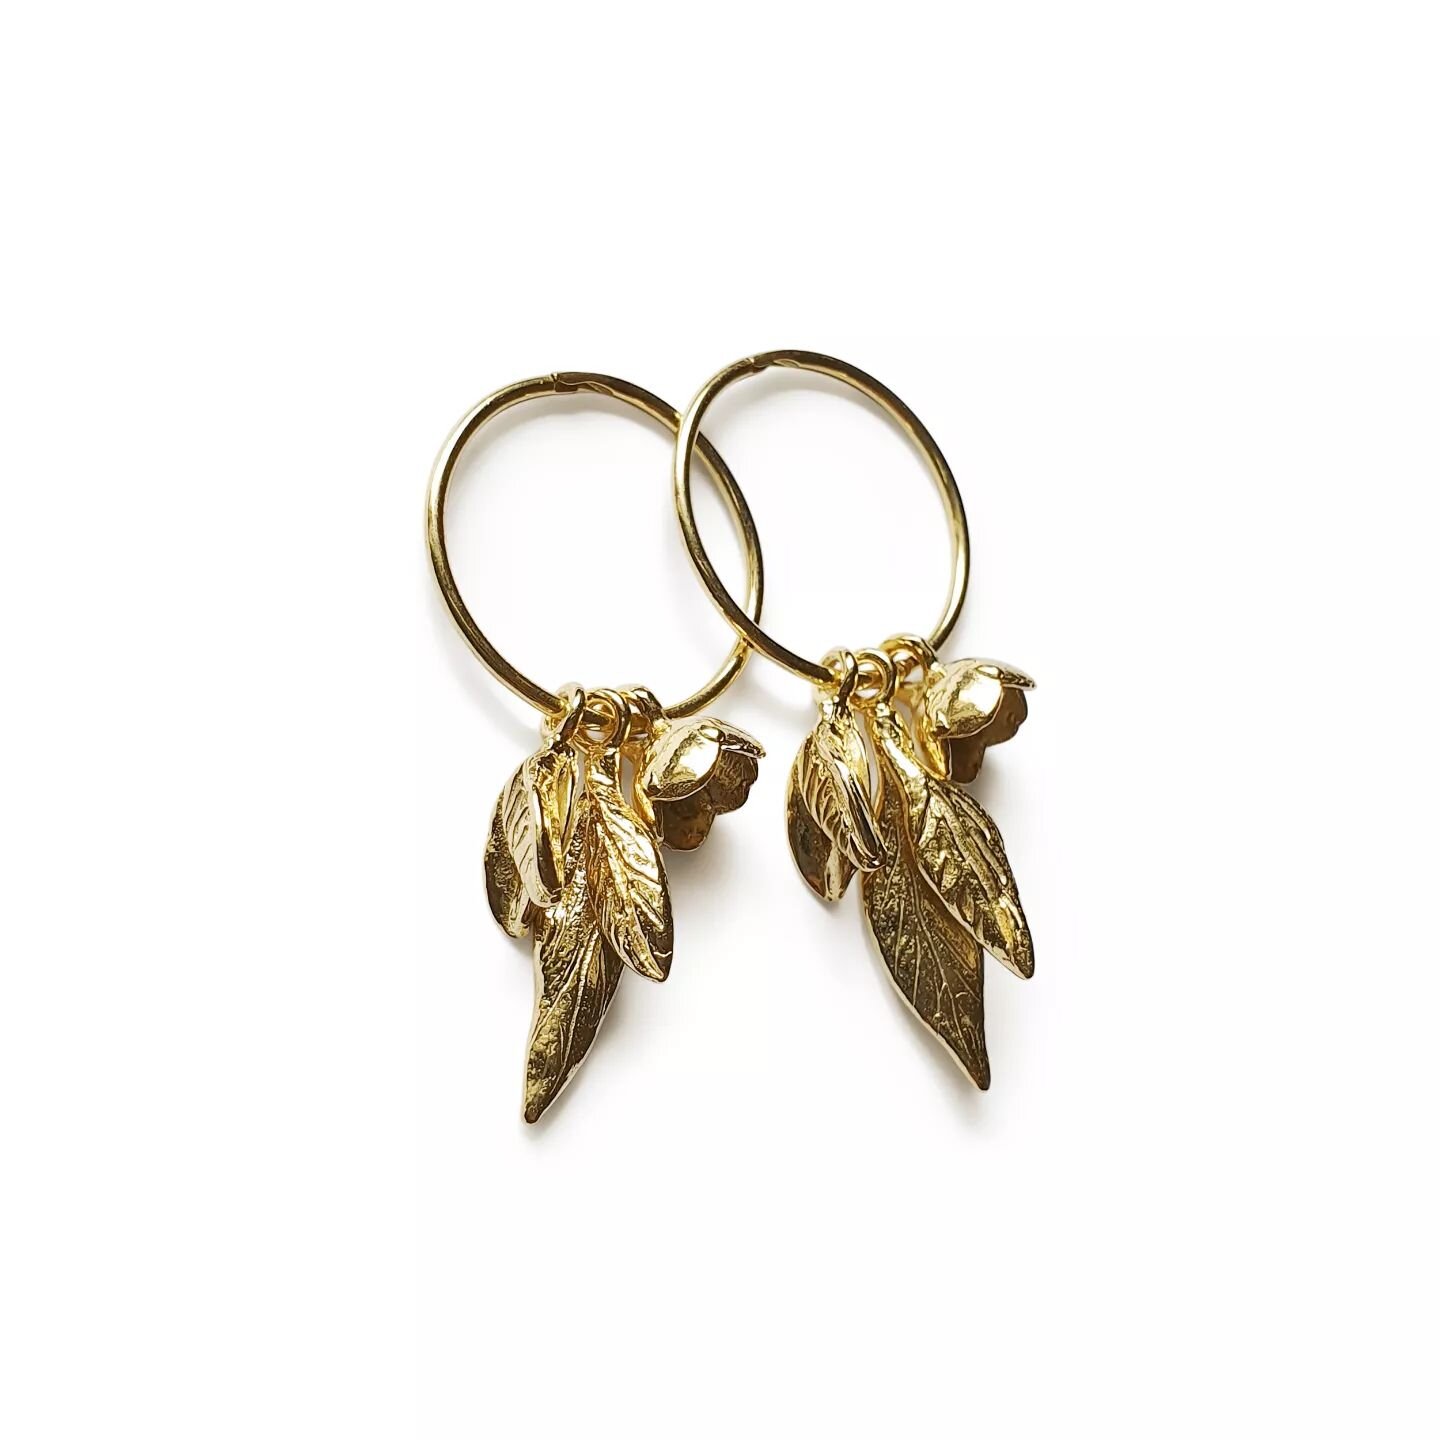 Hand carved, 
Gold Blossom &amp; Leaf
Charn hoop earrings 🌸🌟🌿

Get in touch if you need a lil pair of these in your life! They are great every day wear and can be worn as single, double or triple charm hoops.

#earrings #gold #hoops #earring #blos